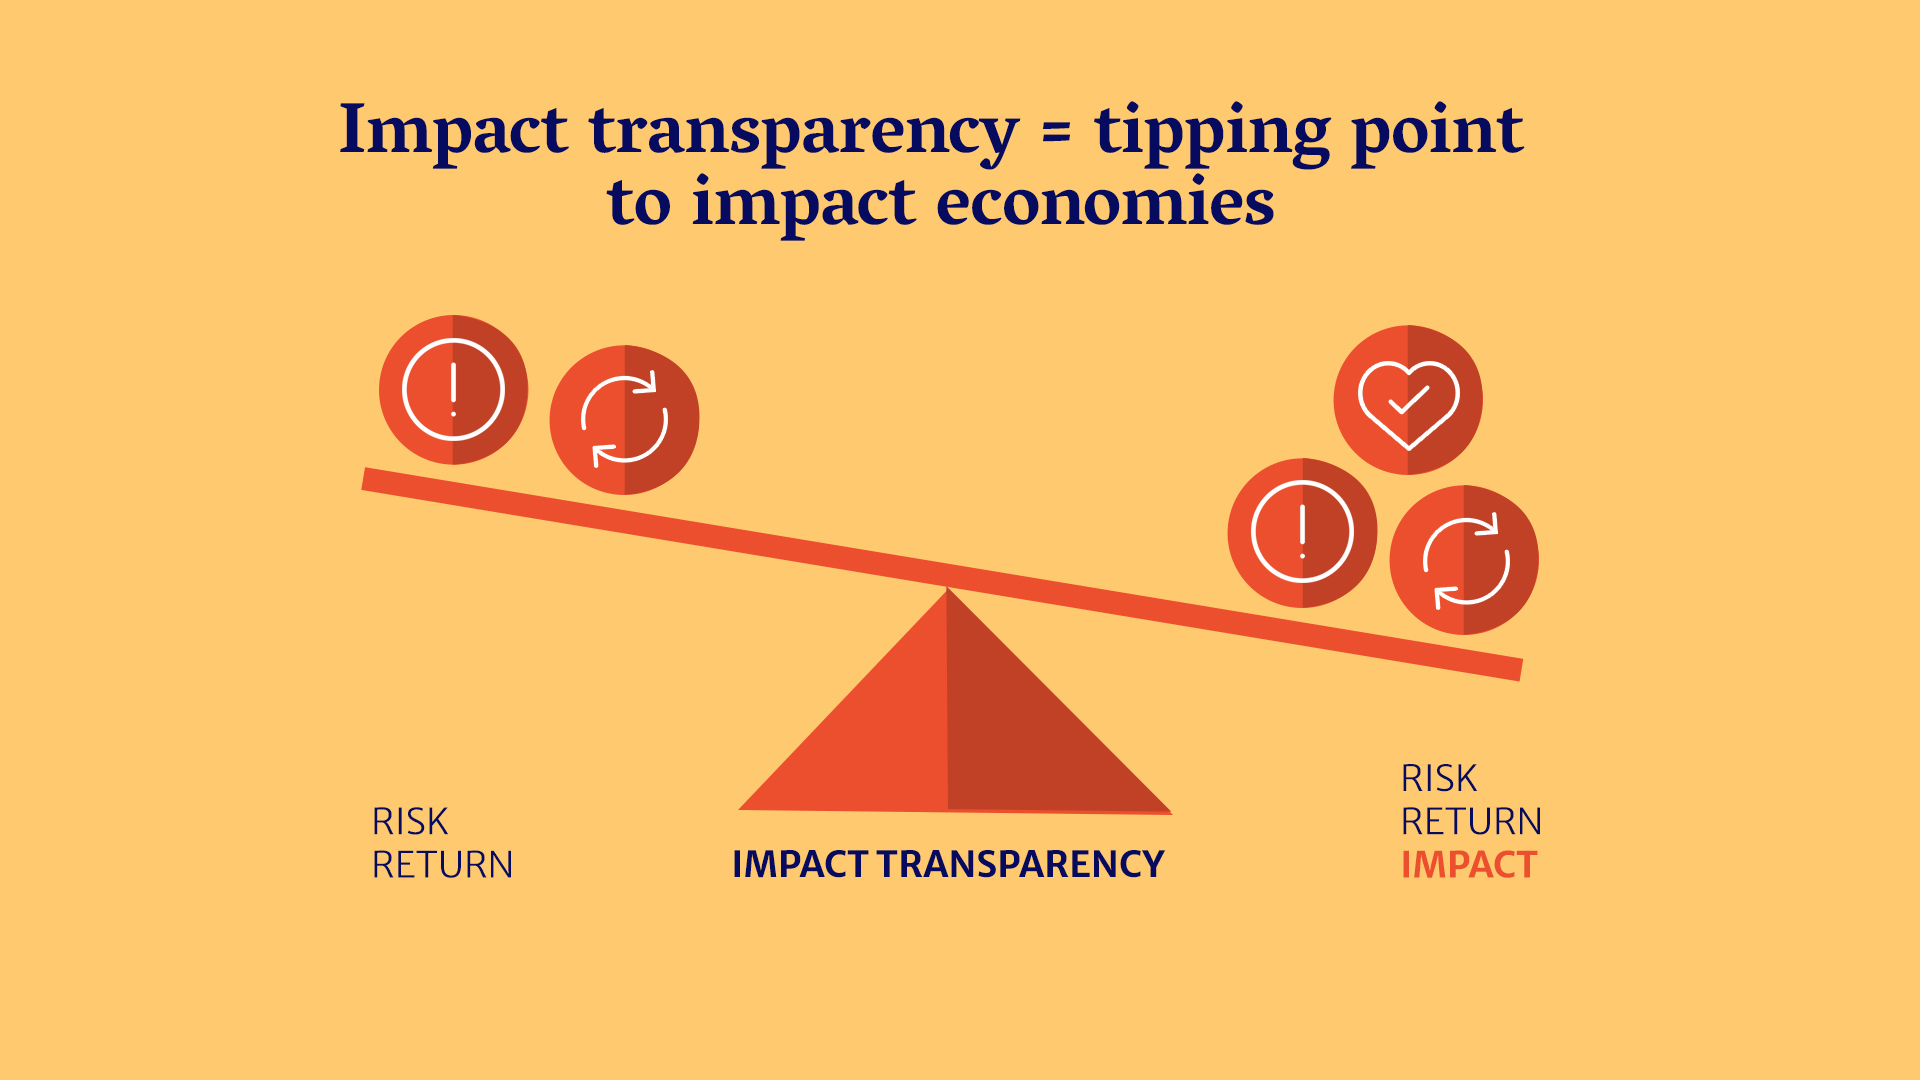 impact transparency is the tipping point to an impact economy graphic